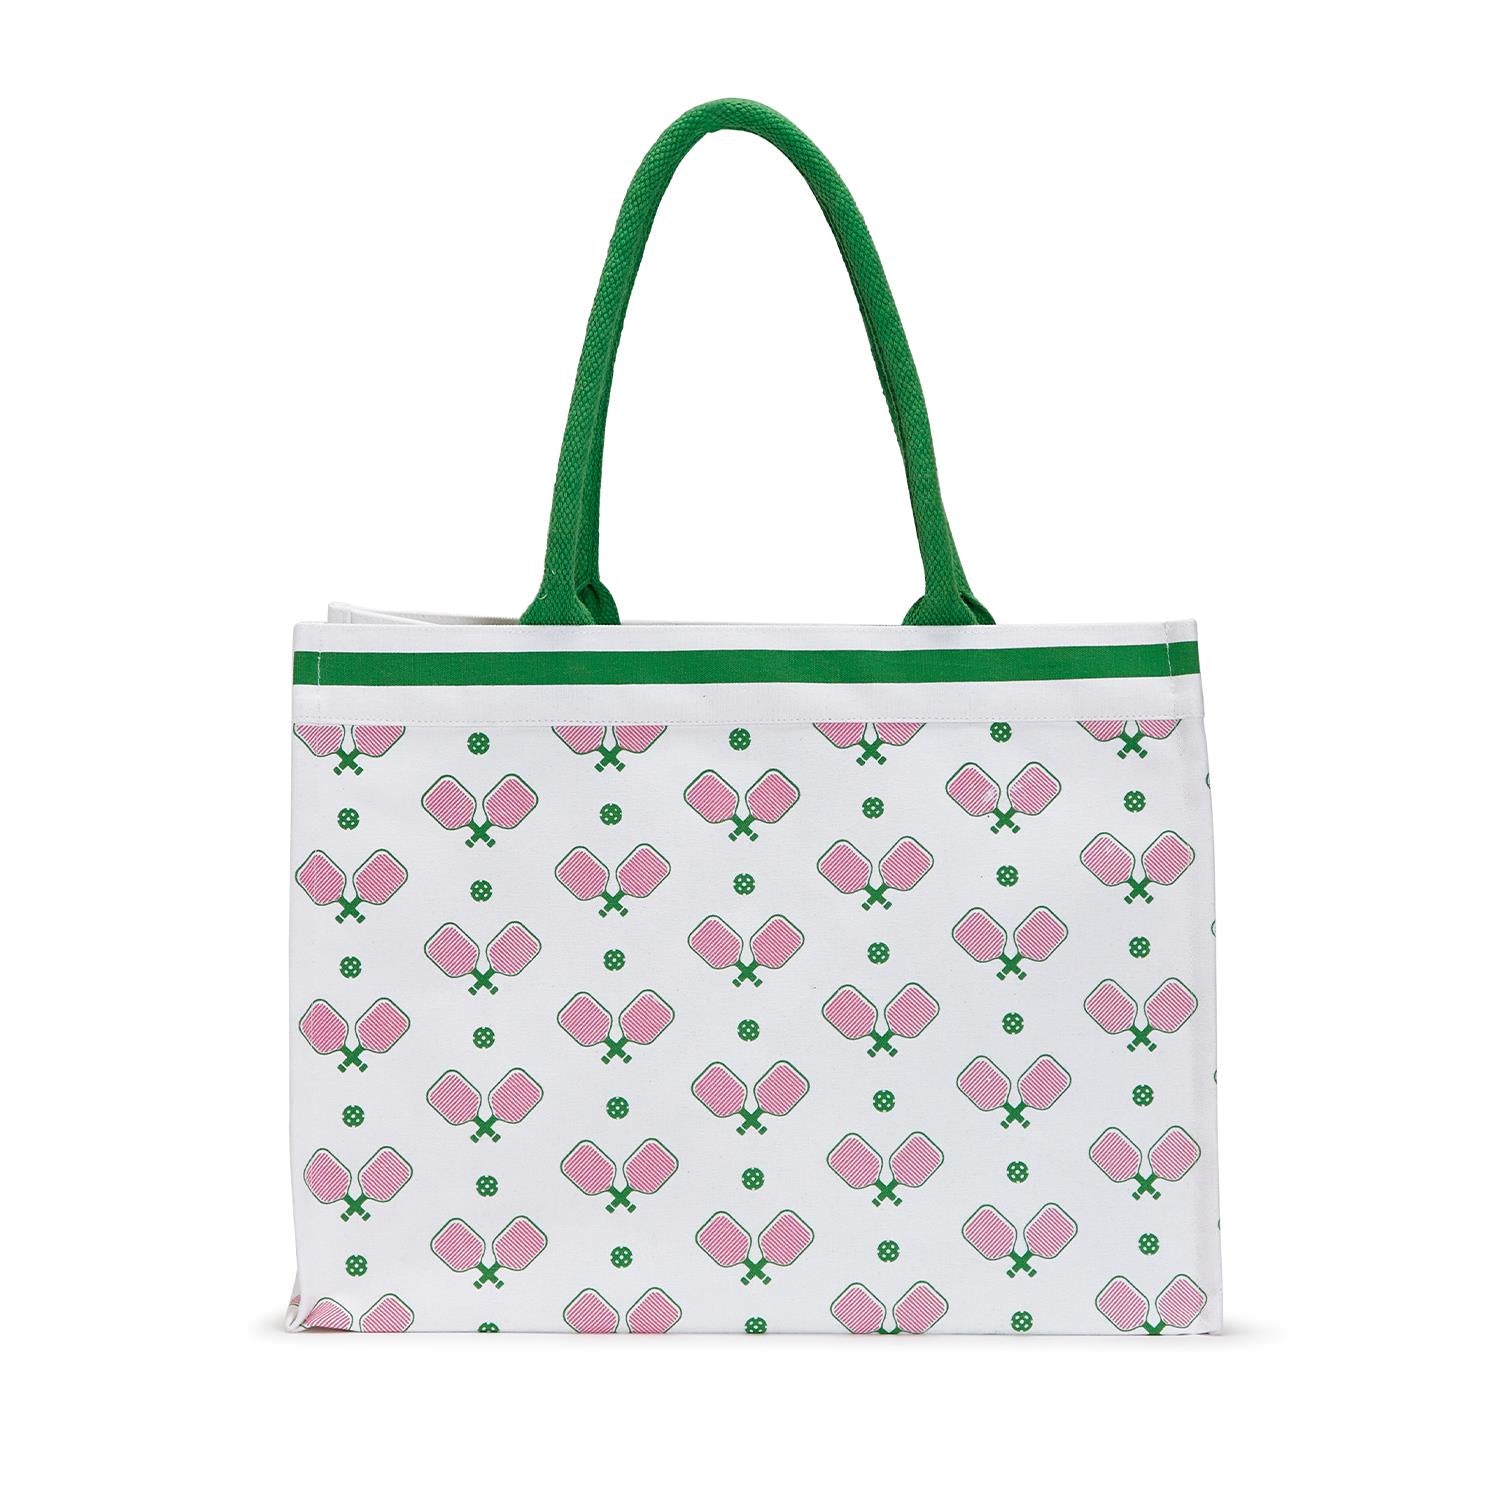 Canvas Tote - Tennis/Pickleball Motif - Sprinkled With Pink